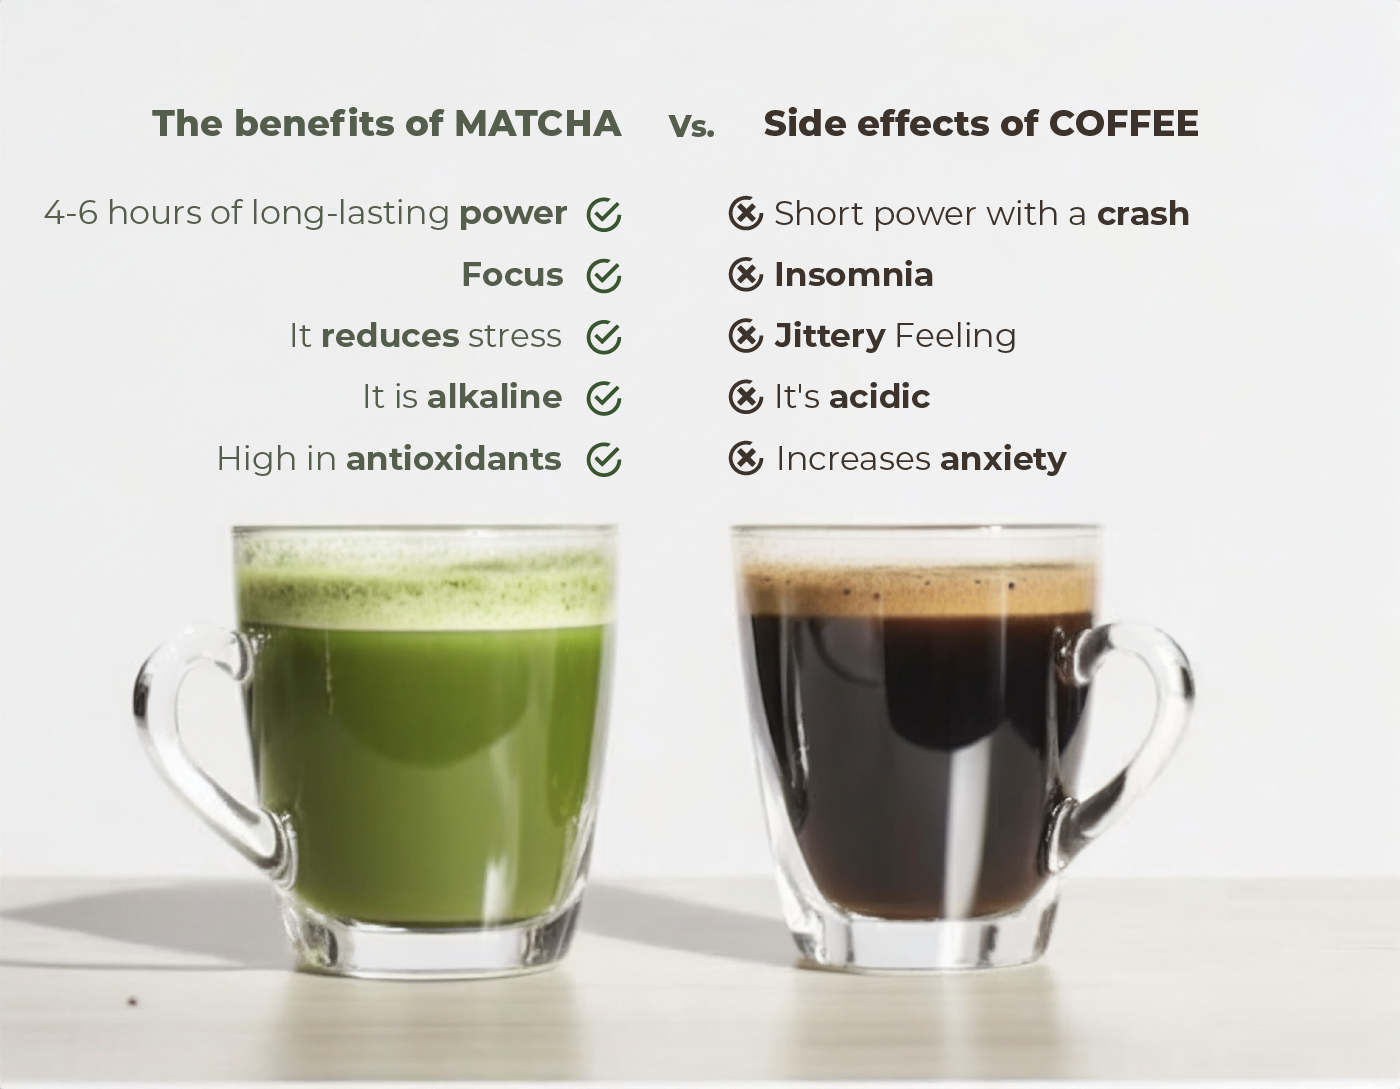 Matcha tea offers a healthy alternative to coffee, providing notable health benefits. Rich in antioxidants, especially vitamin E, matcha promotes skin health and combats aging. Additionally, it contains L-theanine, an amino acid that enhances stress management and promotes energy balance. On the other hand, coffee, while energizing, may have side effects such as nervousness, insomnia, and stomach acidity, in addition to causing energy spikes and crashes. The choice between matcha tea and coffee may depend on individual preferences and wellness goals.